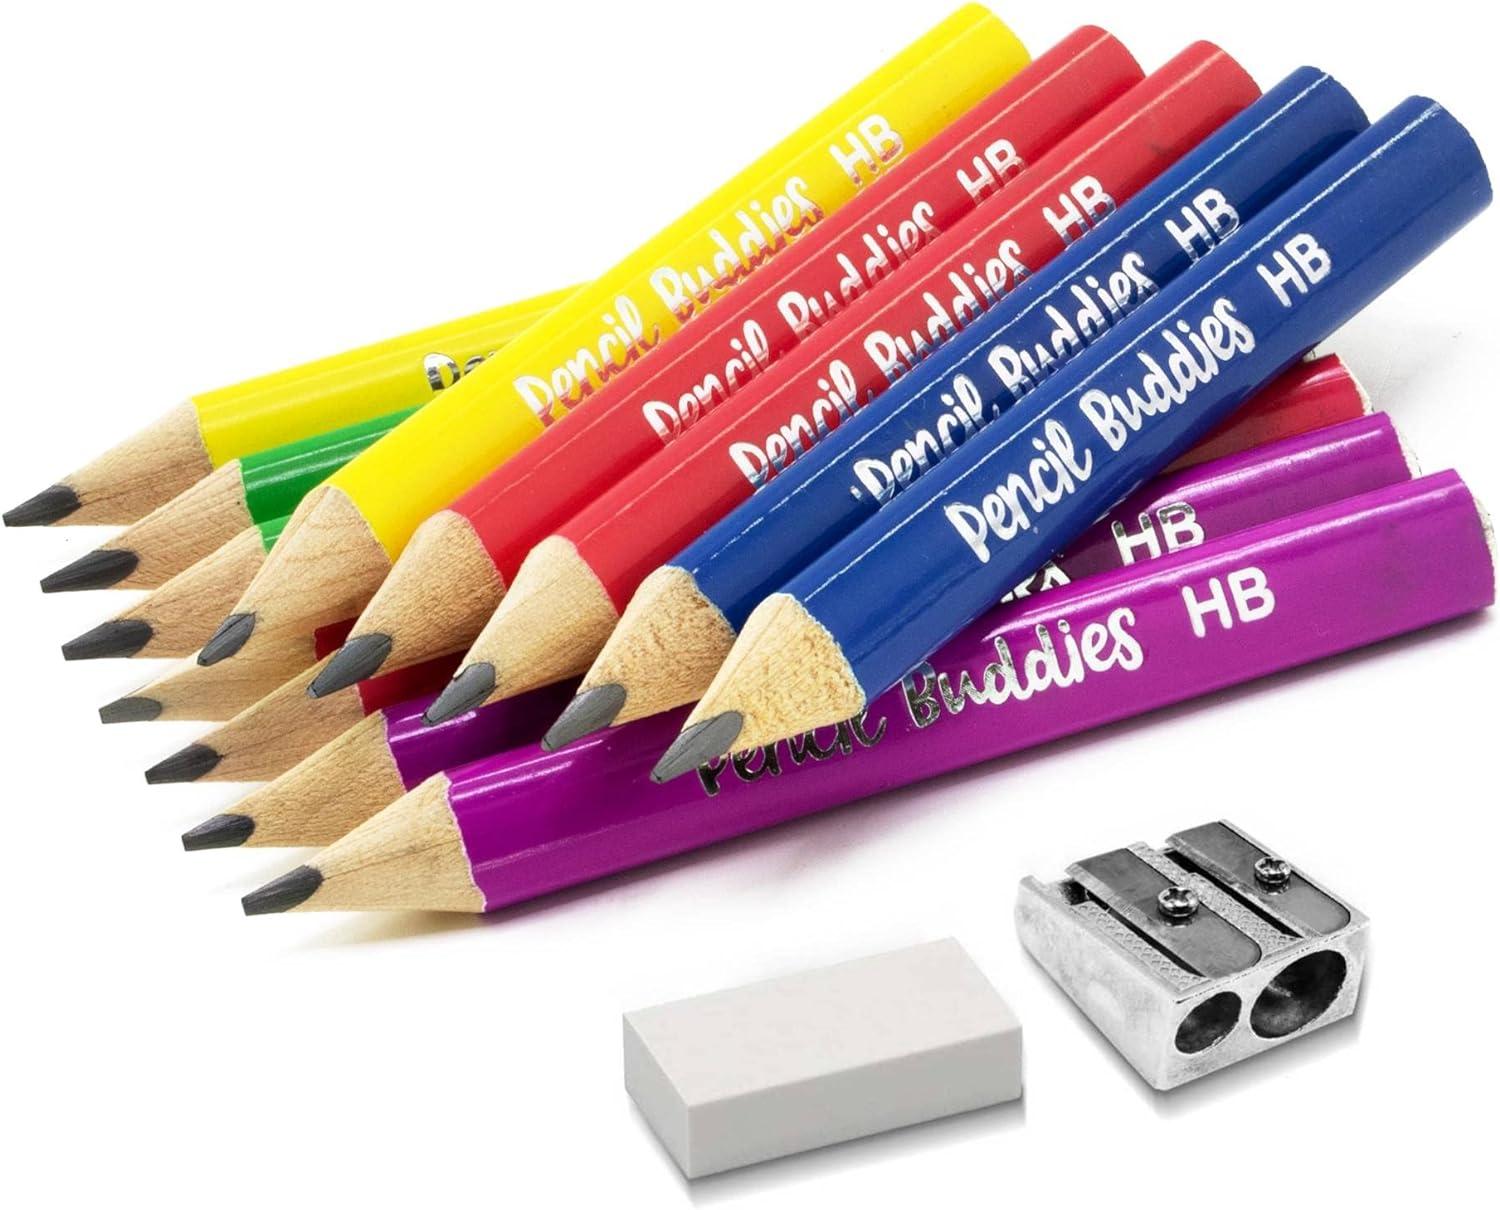 Short Fat Kids Pencils - 12 Pencils With Thick Triangle Shape For Preschoolers Kindergarten Toddlers And Beginners - 12 Fat Pencils With 1 Sharpener And Eraser Pencil Buddies Multi Color